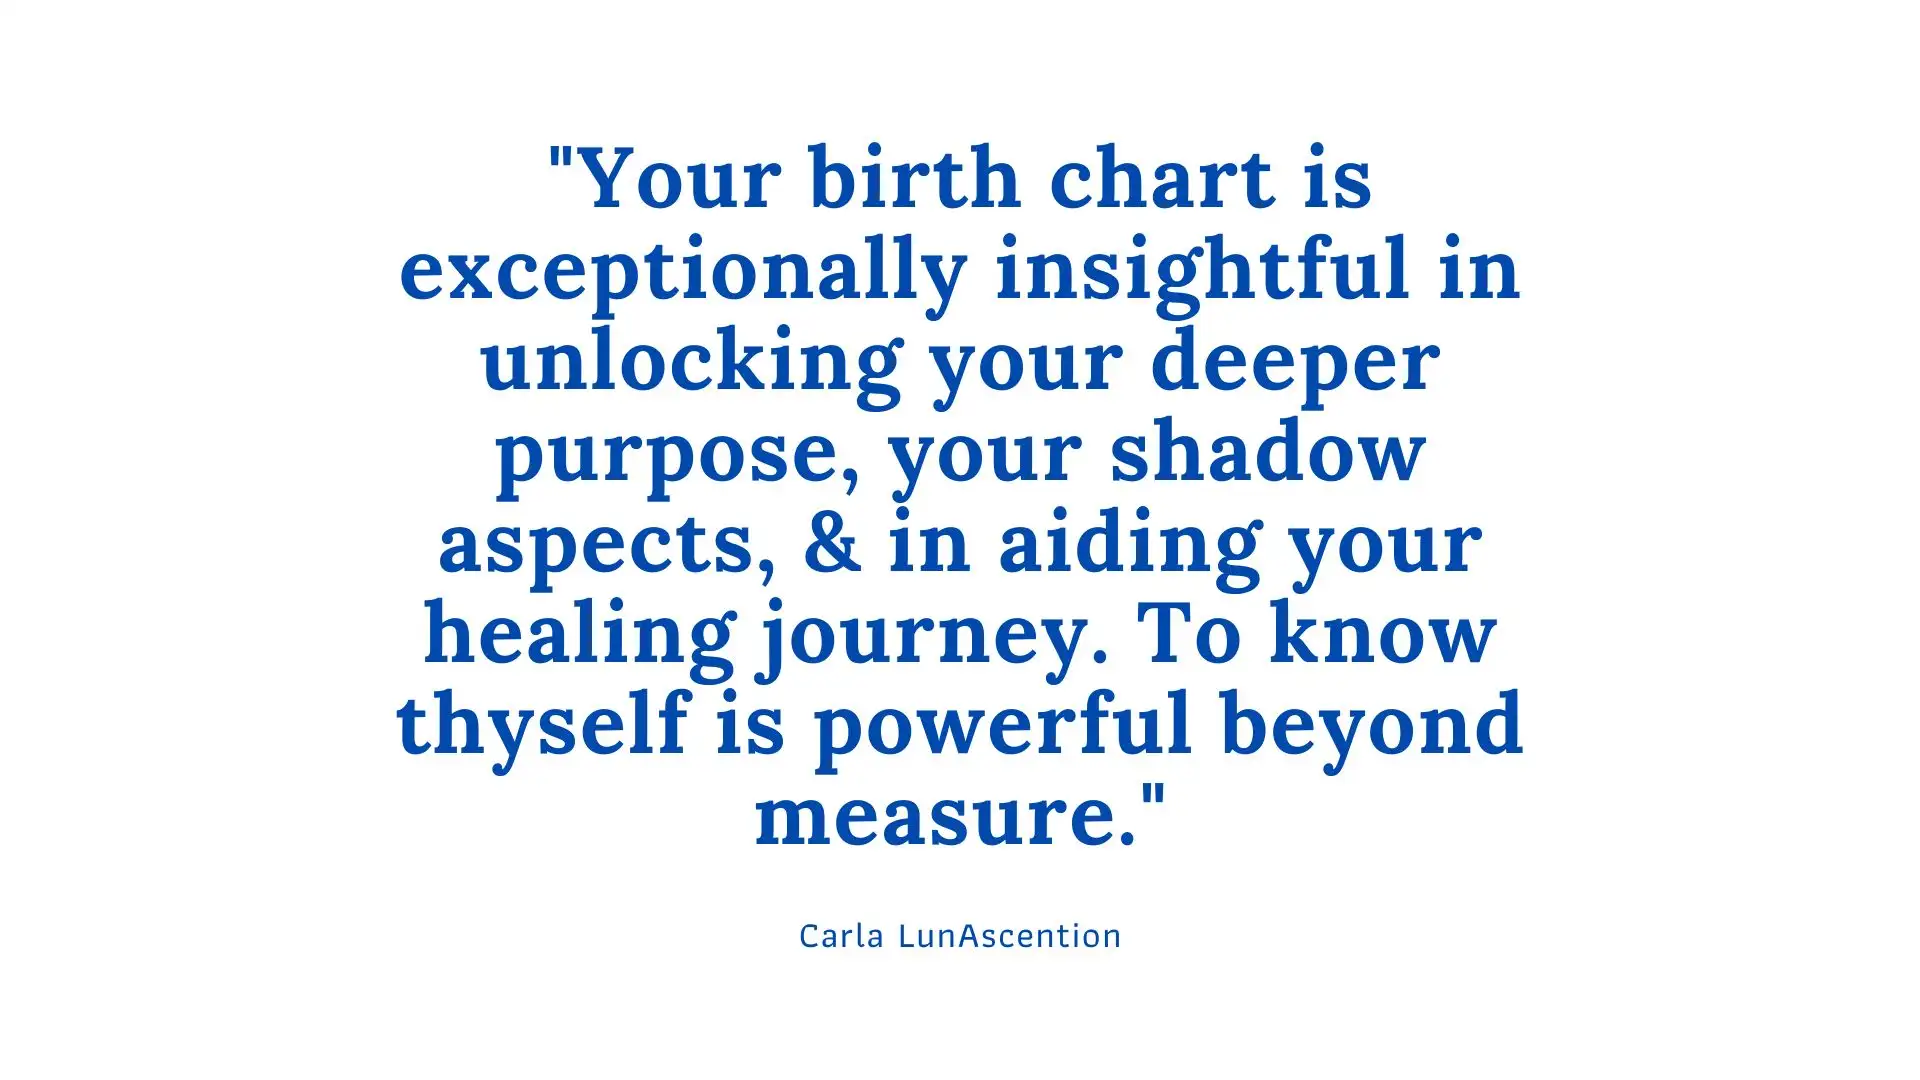 "Your birth chart is exceptionally insightful in unlocking your deeper purpose, your shadow aspects, & in aiding your healing journey. - To know thyself is to work in harmony with the self." Psychic Carla LunAscention